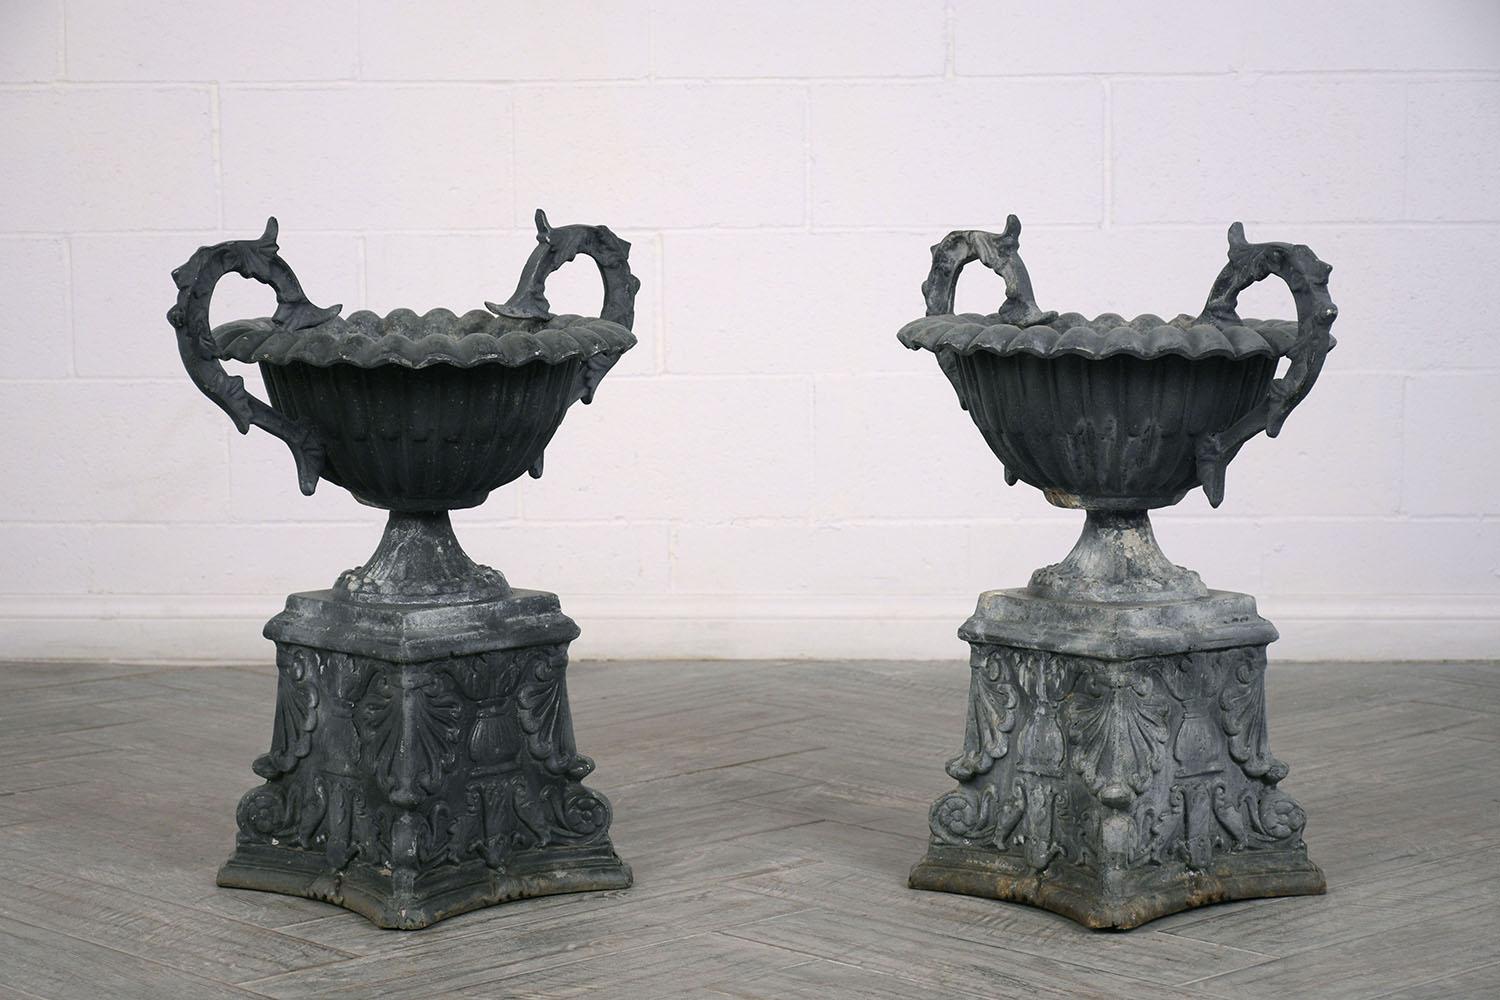 This pair of 1930s neoclassical style outdoor planters or patio garden urns are made of metal with a natural oxidized patina. The urns have two handles with acanthus leaf details and a scalloped lip on the basin. The pedestal is adorned with sea